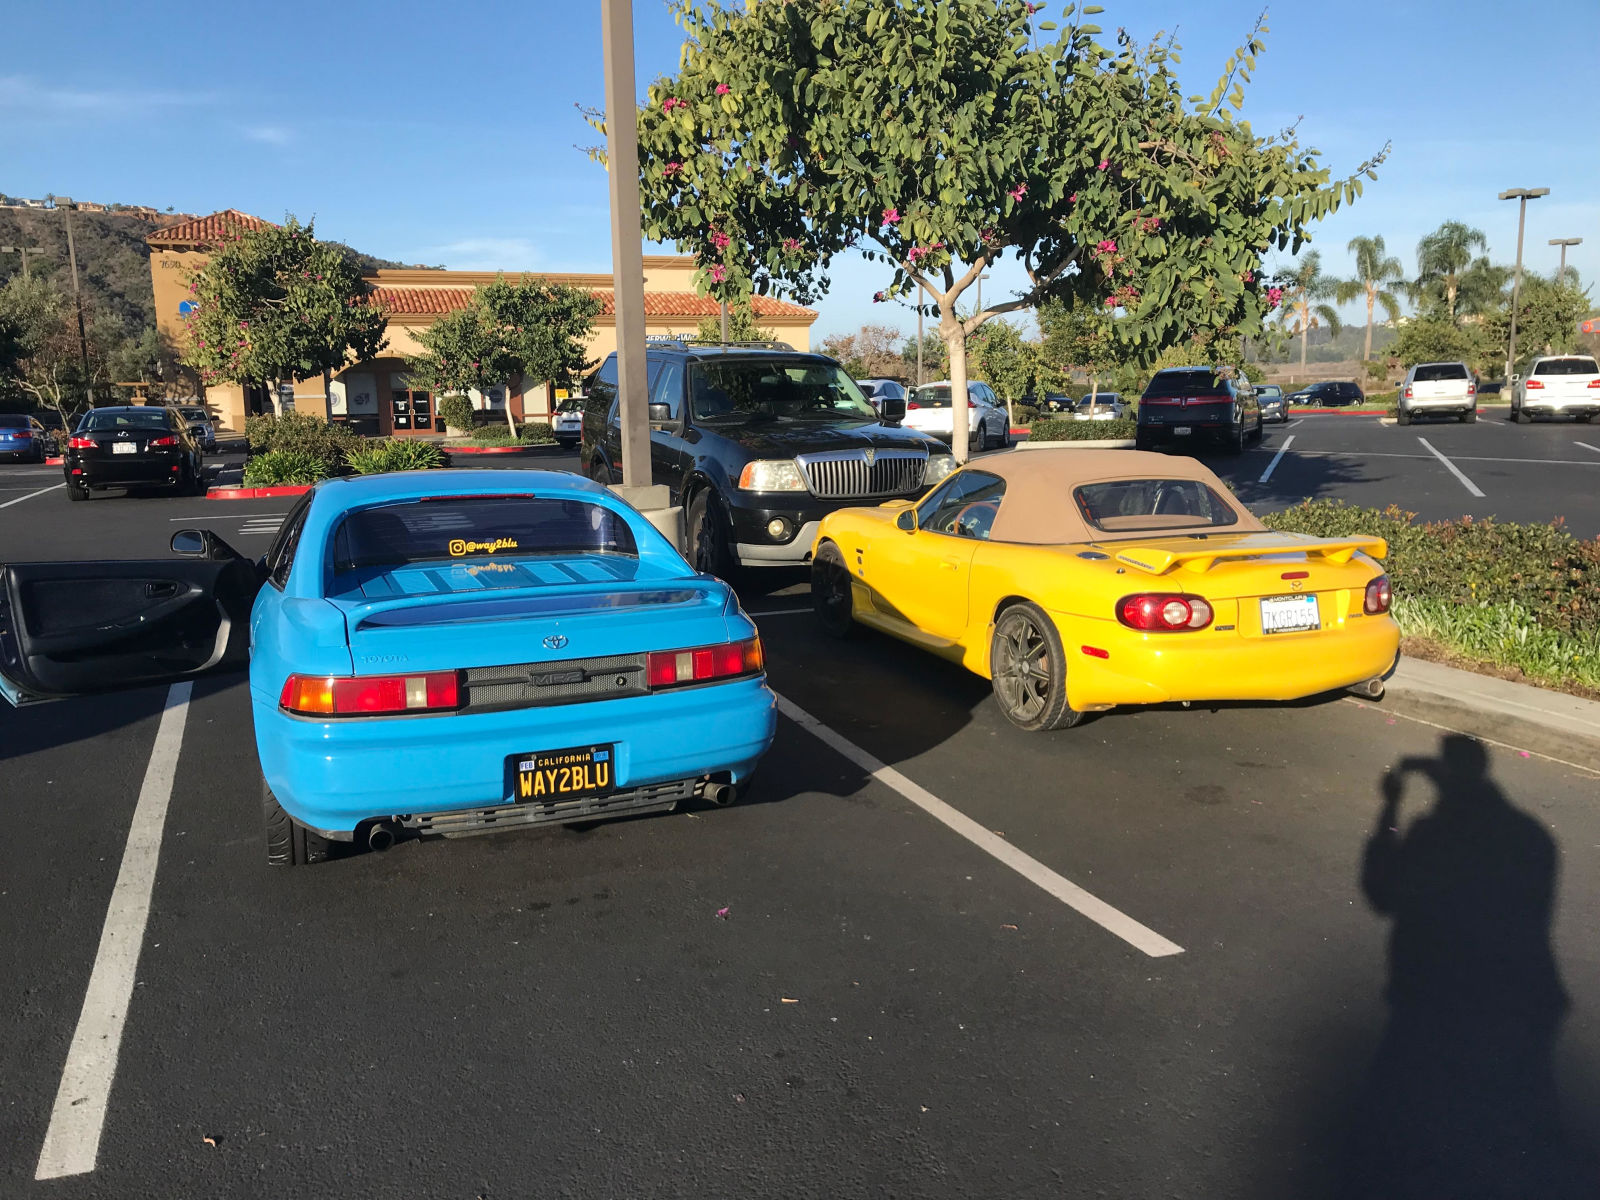 Yup, I parked just to get a pic with the NB Miata. 